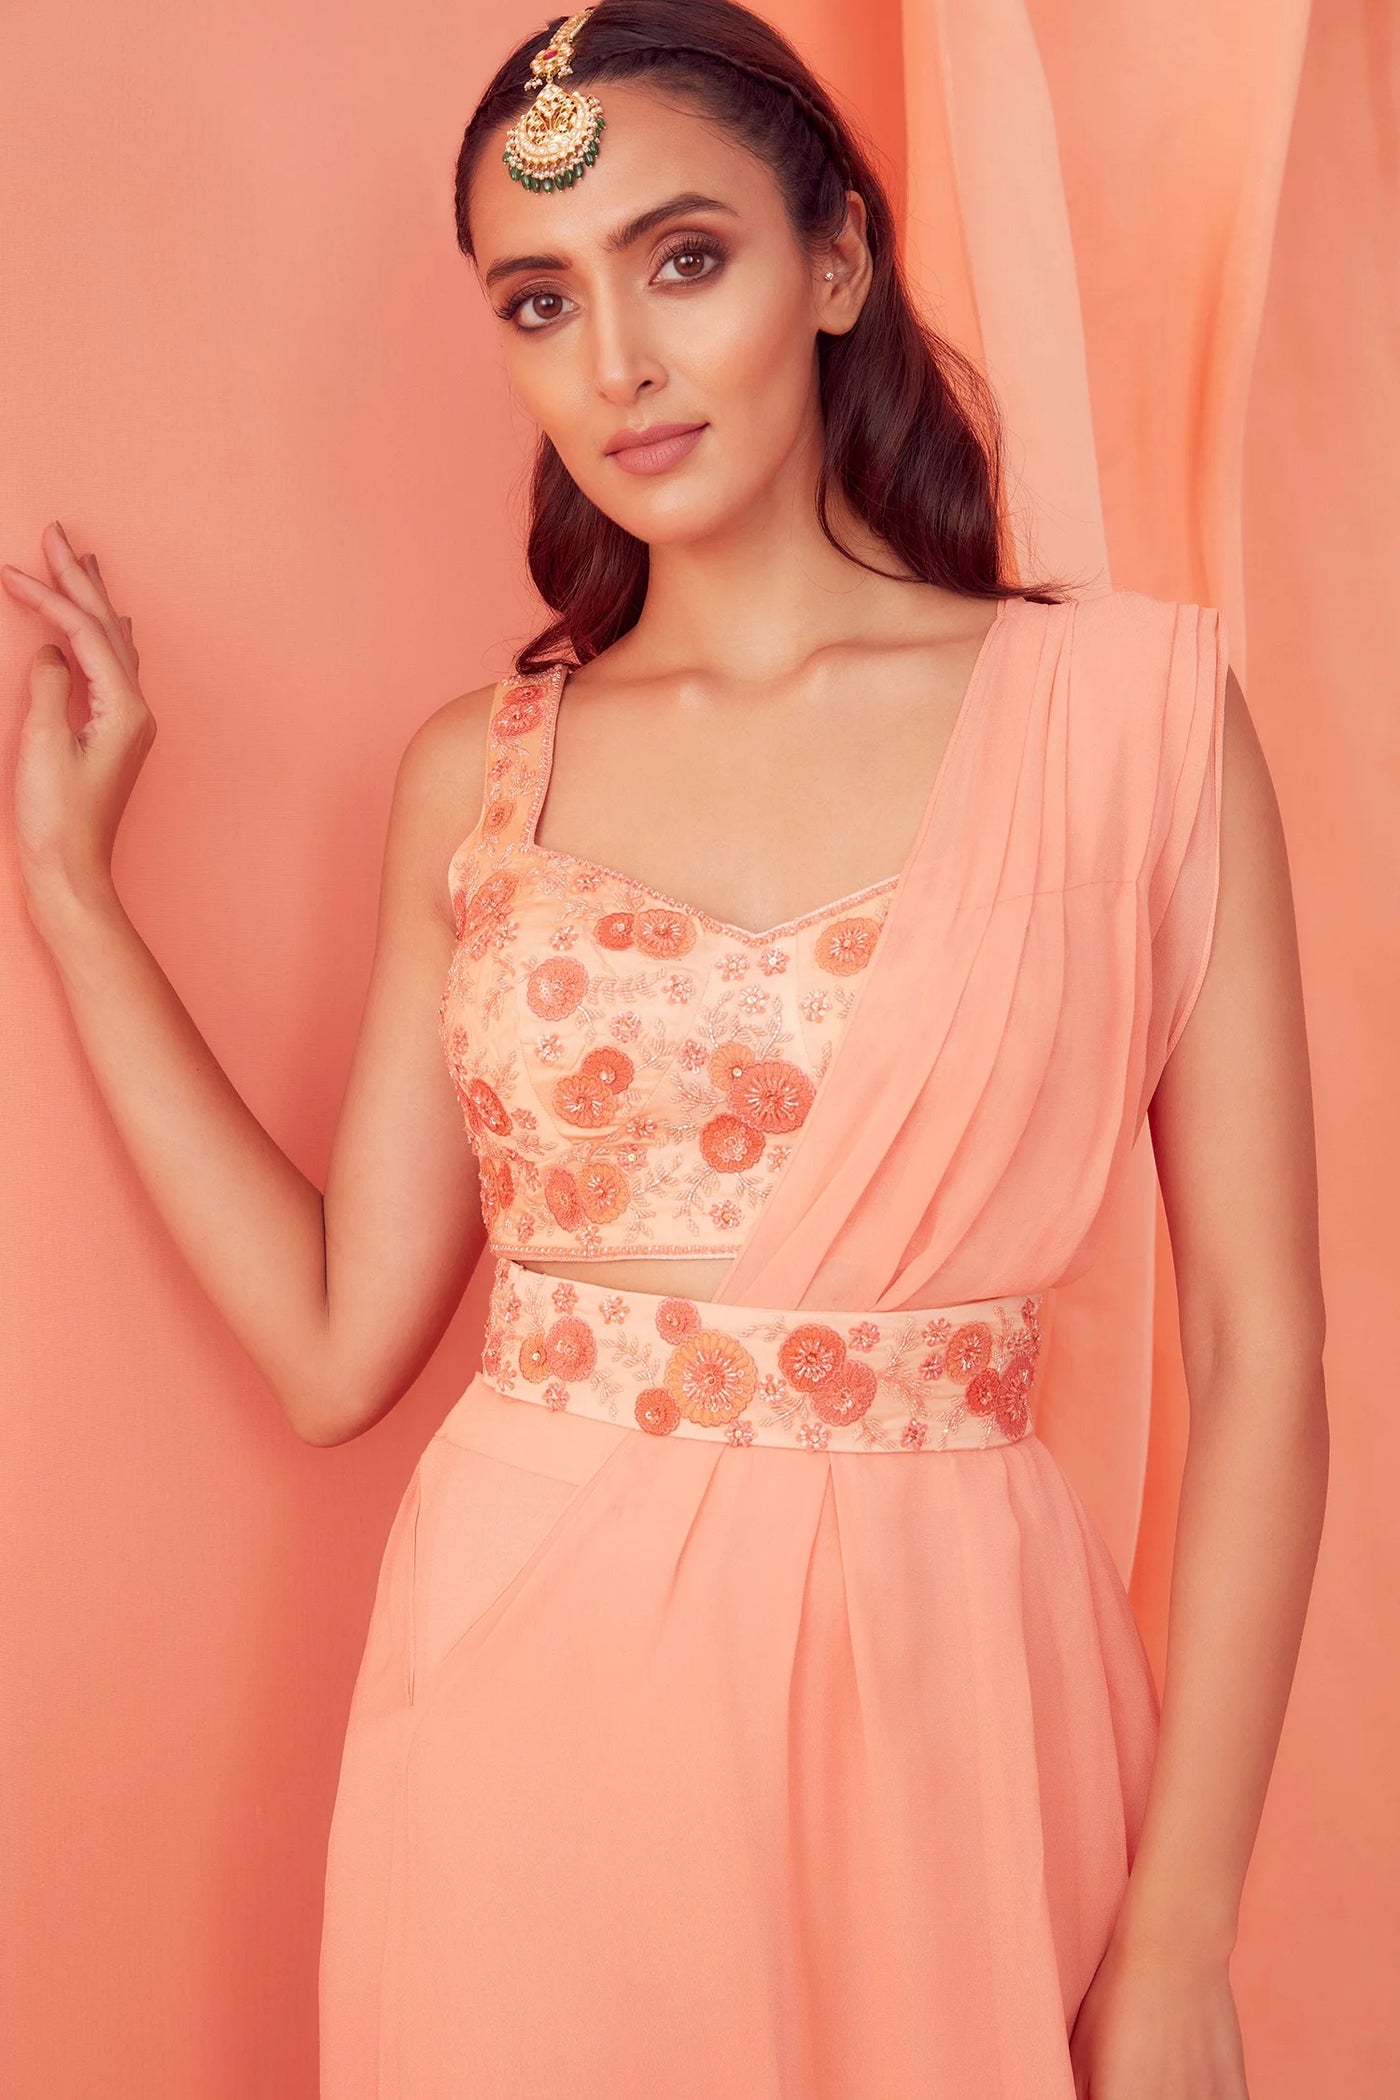 Peach Floral Pre-draped Saree - Indian Clothing in Denver, CO, Aurora, CO, Boulder, CO, Fort Collins, CO, Colorado Springs, CO, Parker, CO, Highlands Ranch, CO, Cherry Creek, CO, Centennial, CO, and Longmont, CO. Nationwide shipping USA - India Fashion X